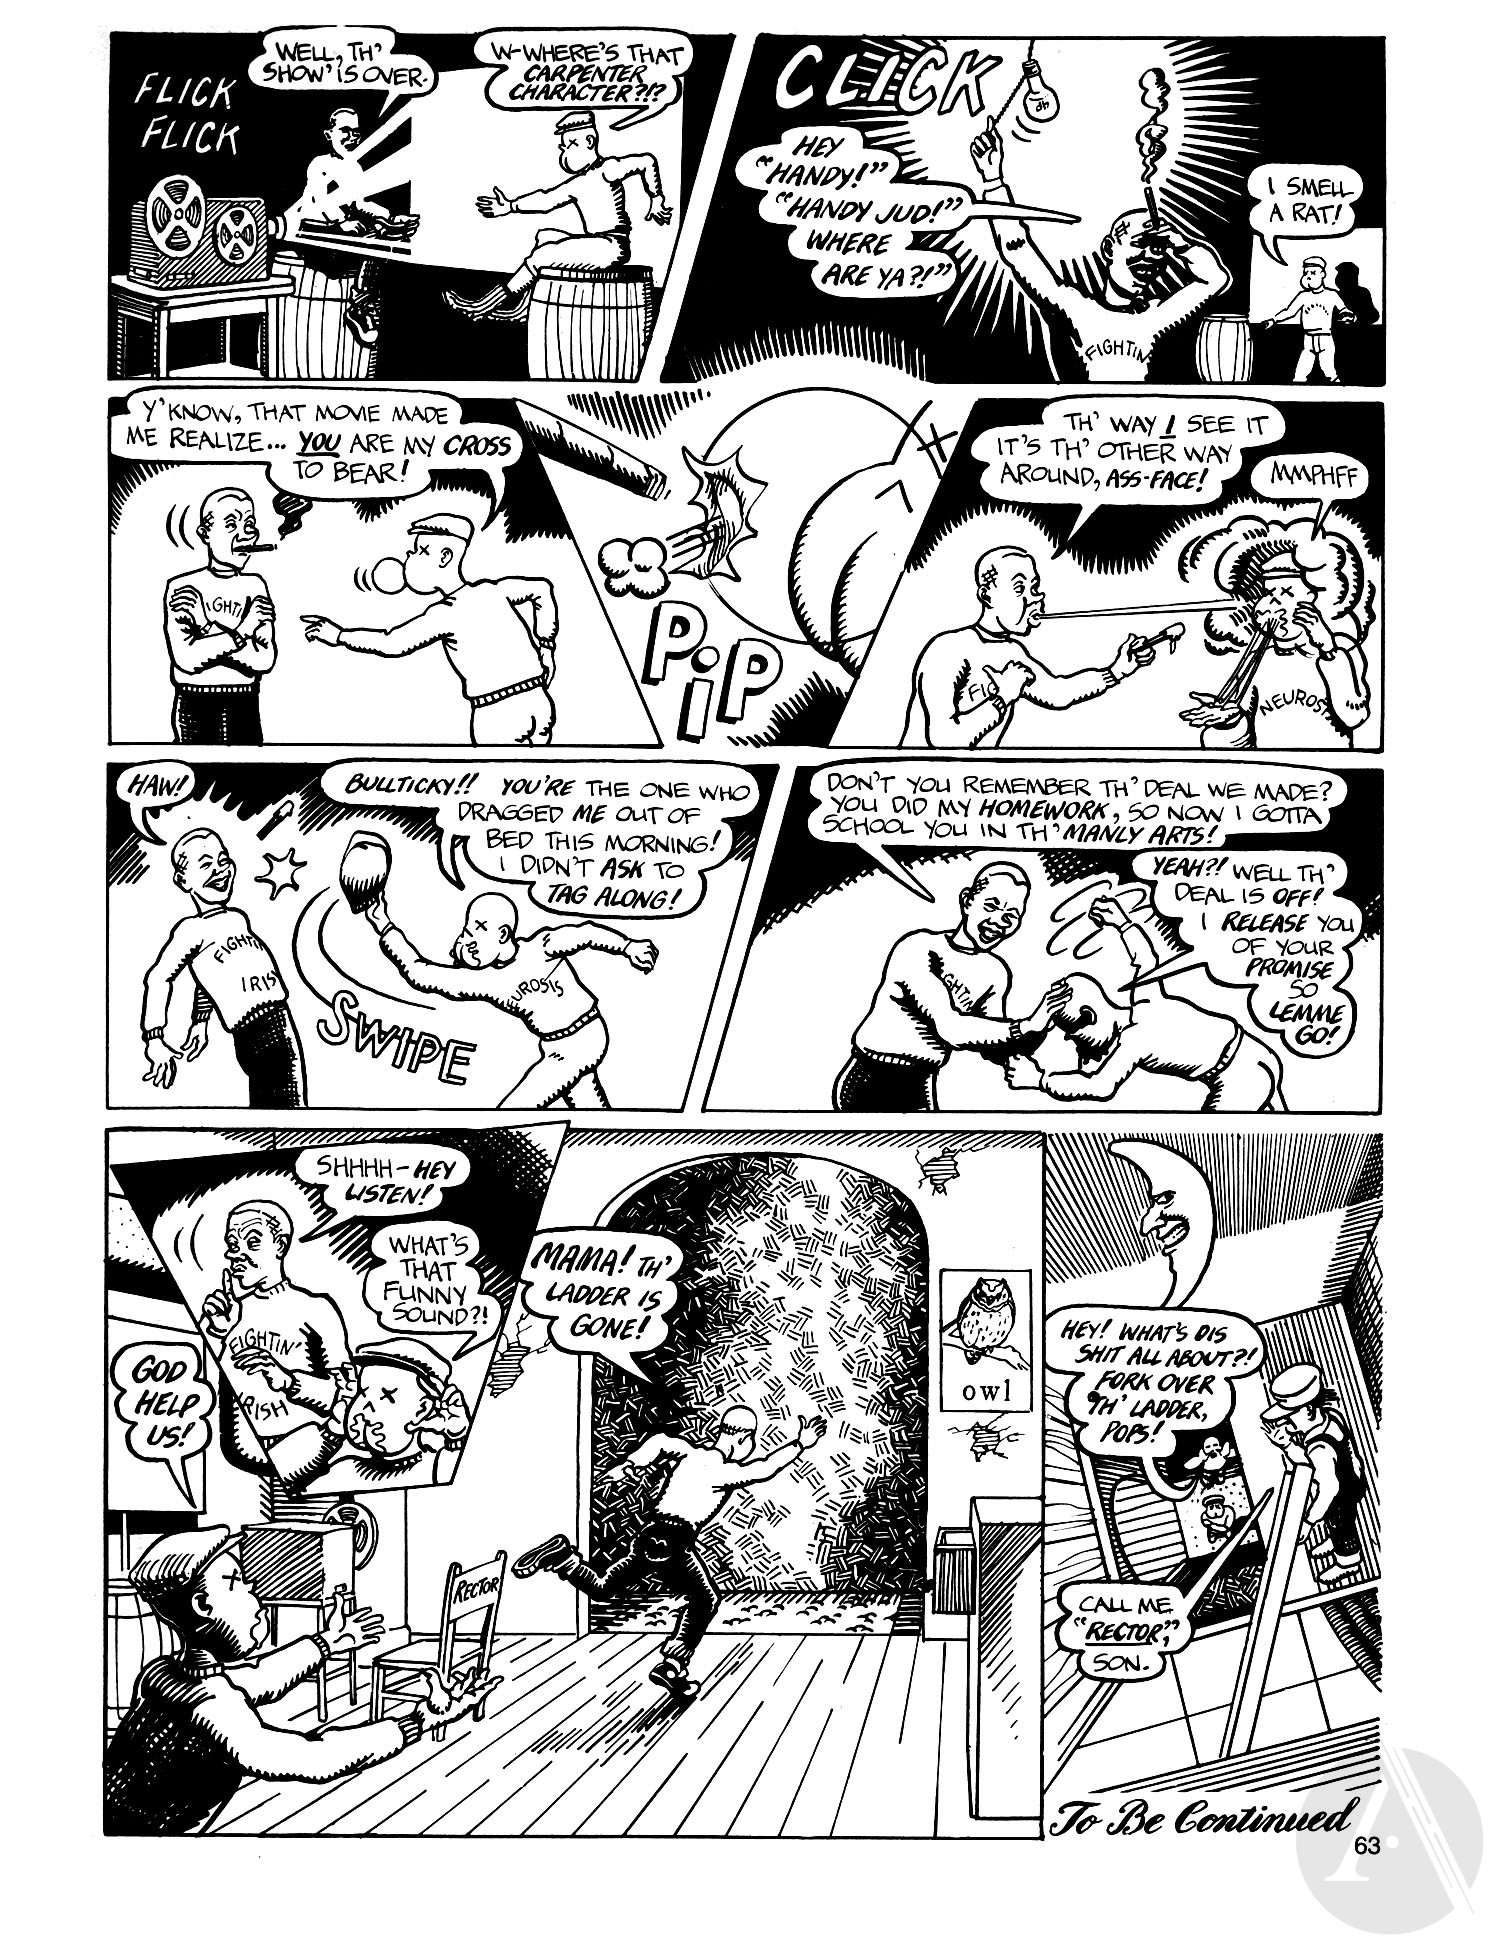 Read online Comix Book comic -  Issue #2 - 65